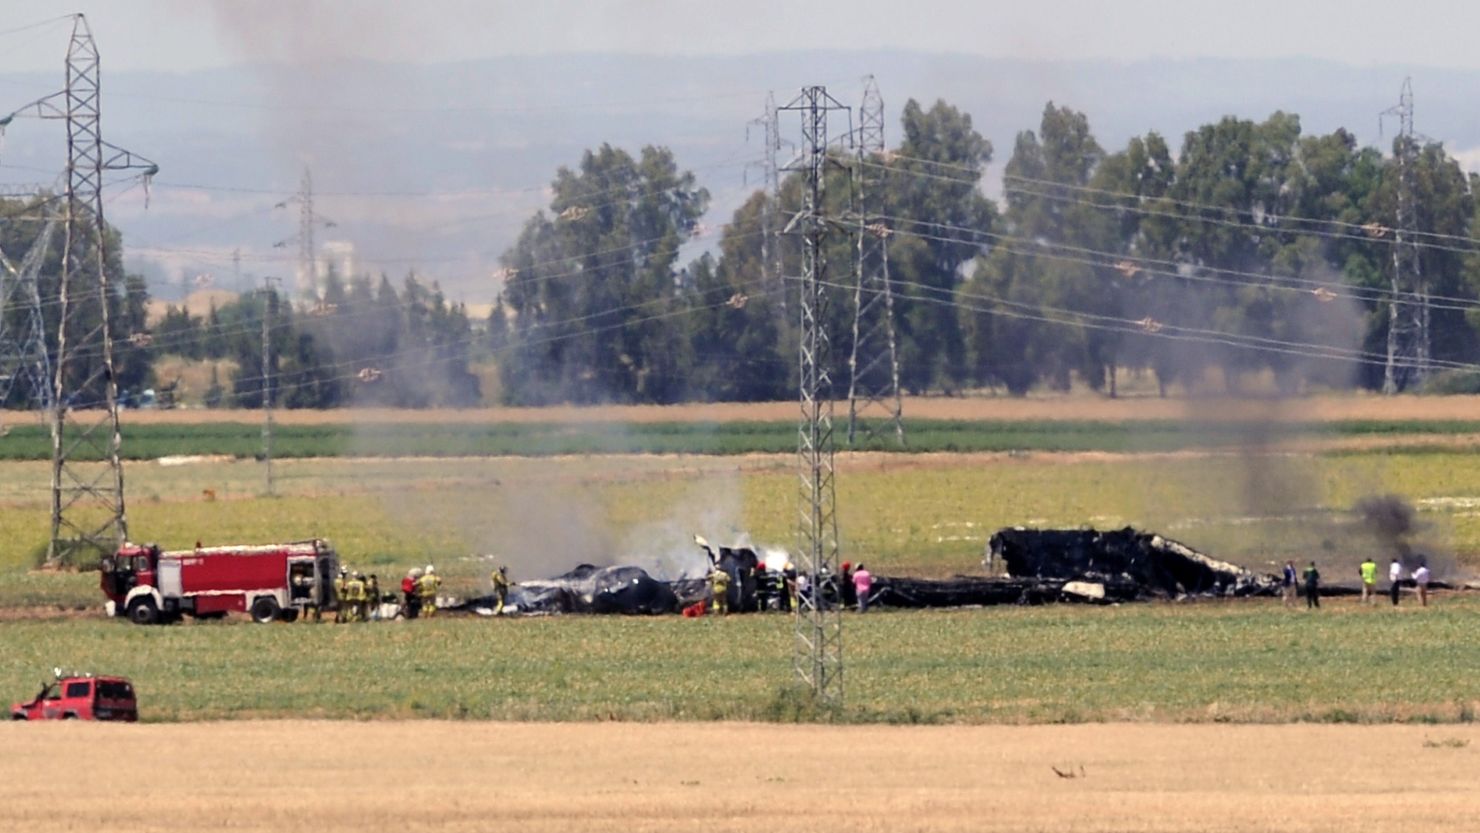 The wreckage of an Airbus A400M military transport plane after it crashed near Seville on May 9, 2015.